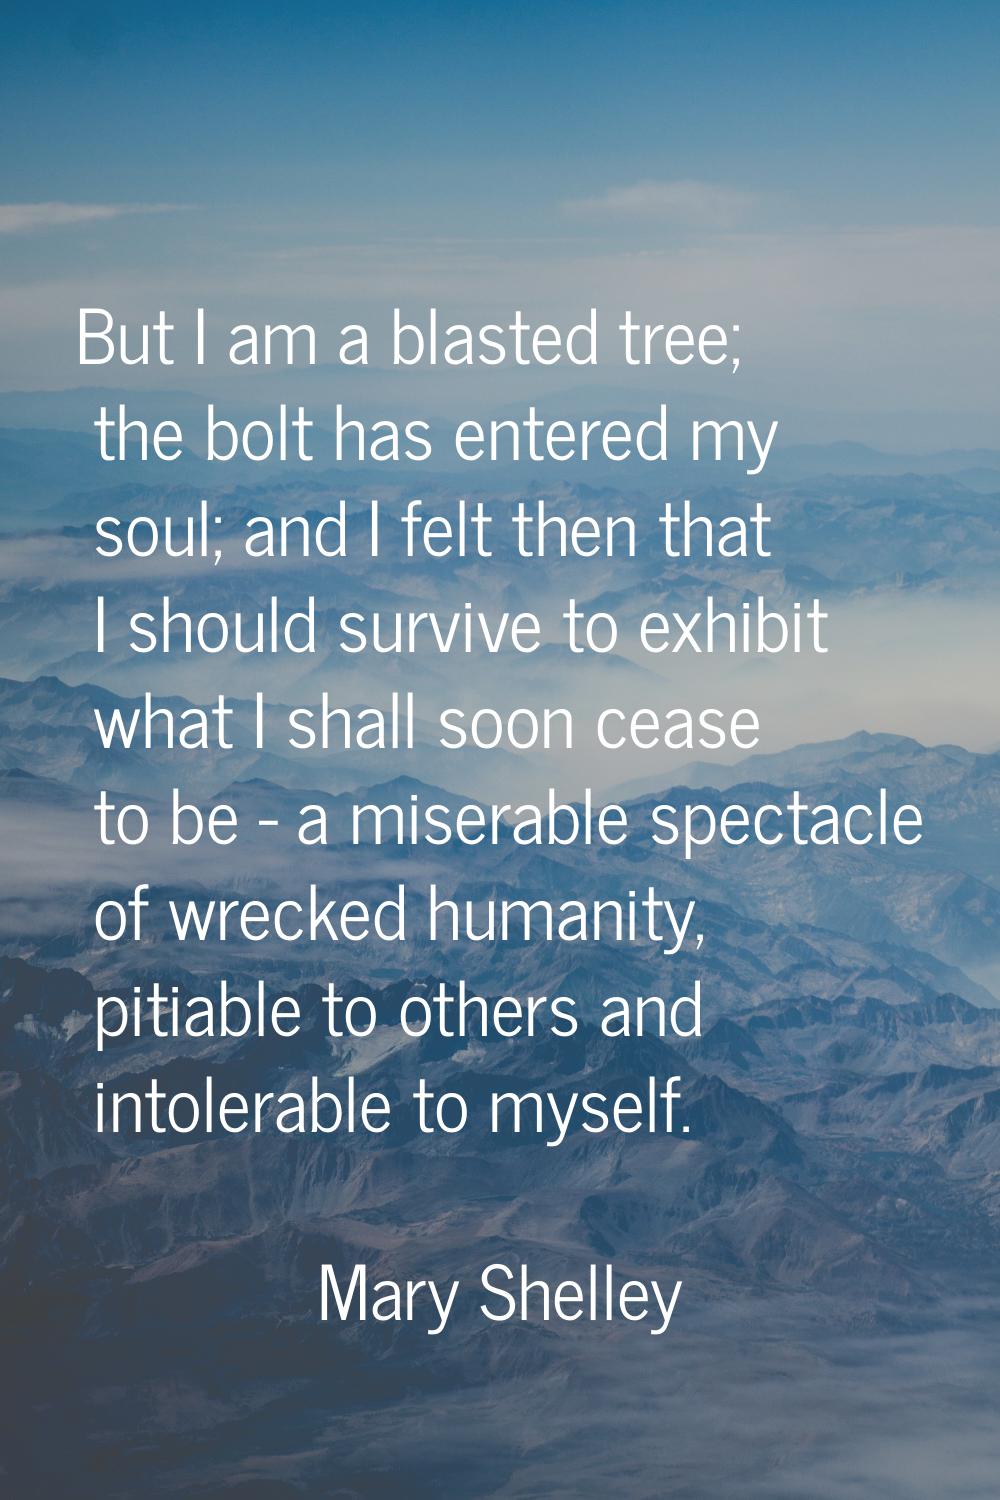 But I am a blasted tree; the bolt has entered my soul; and I felt then that I should survive to exh